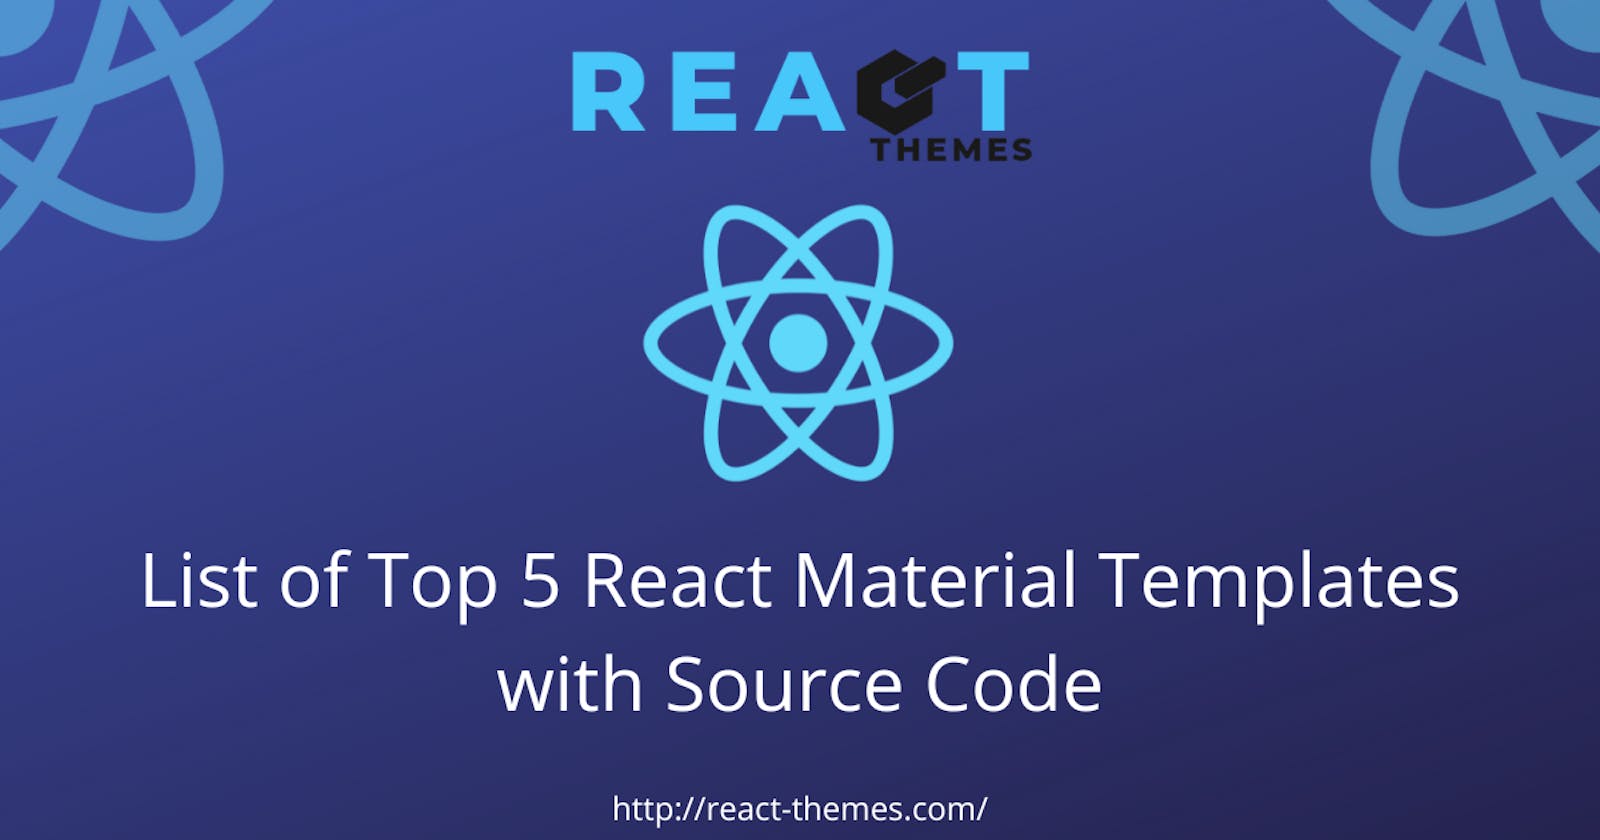 List of Top 5 React Material Templates with Source Code